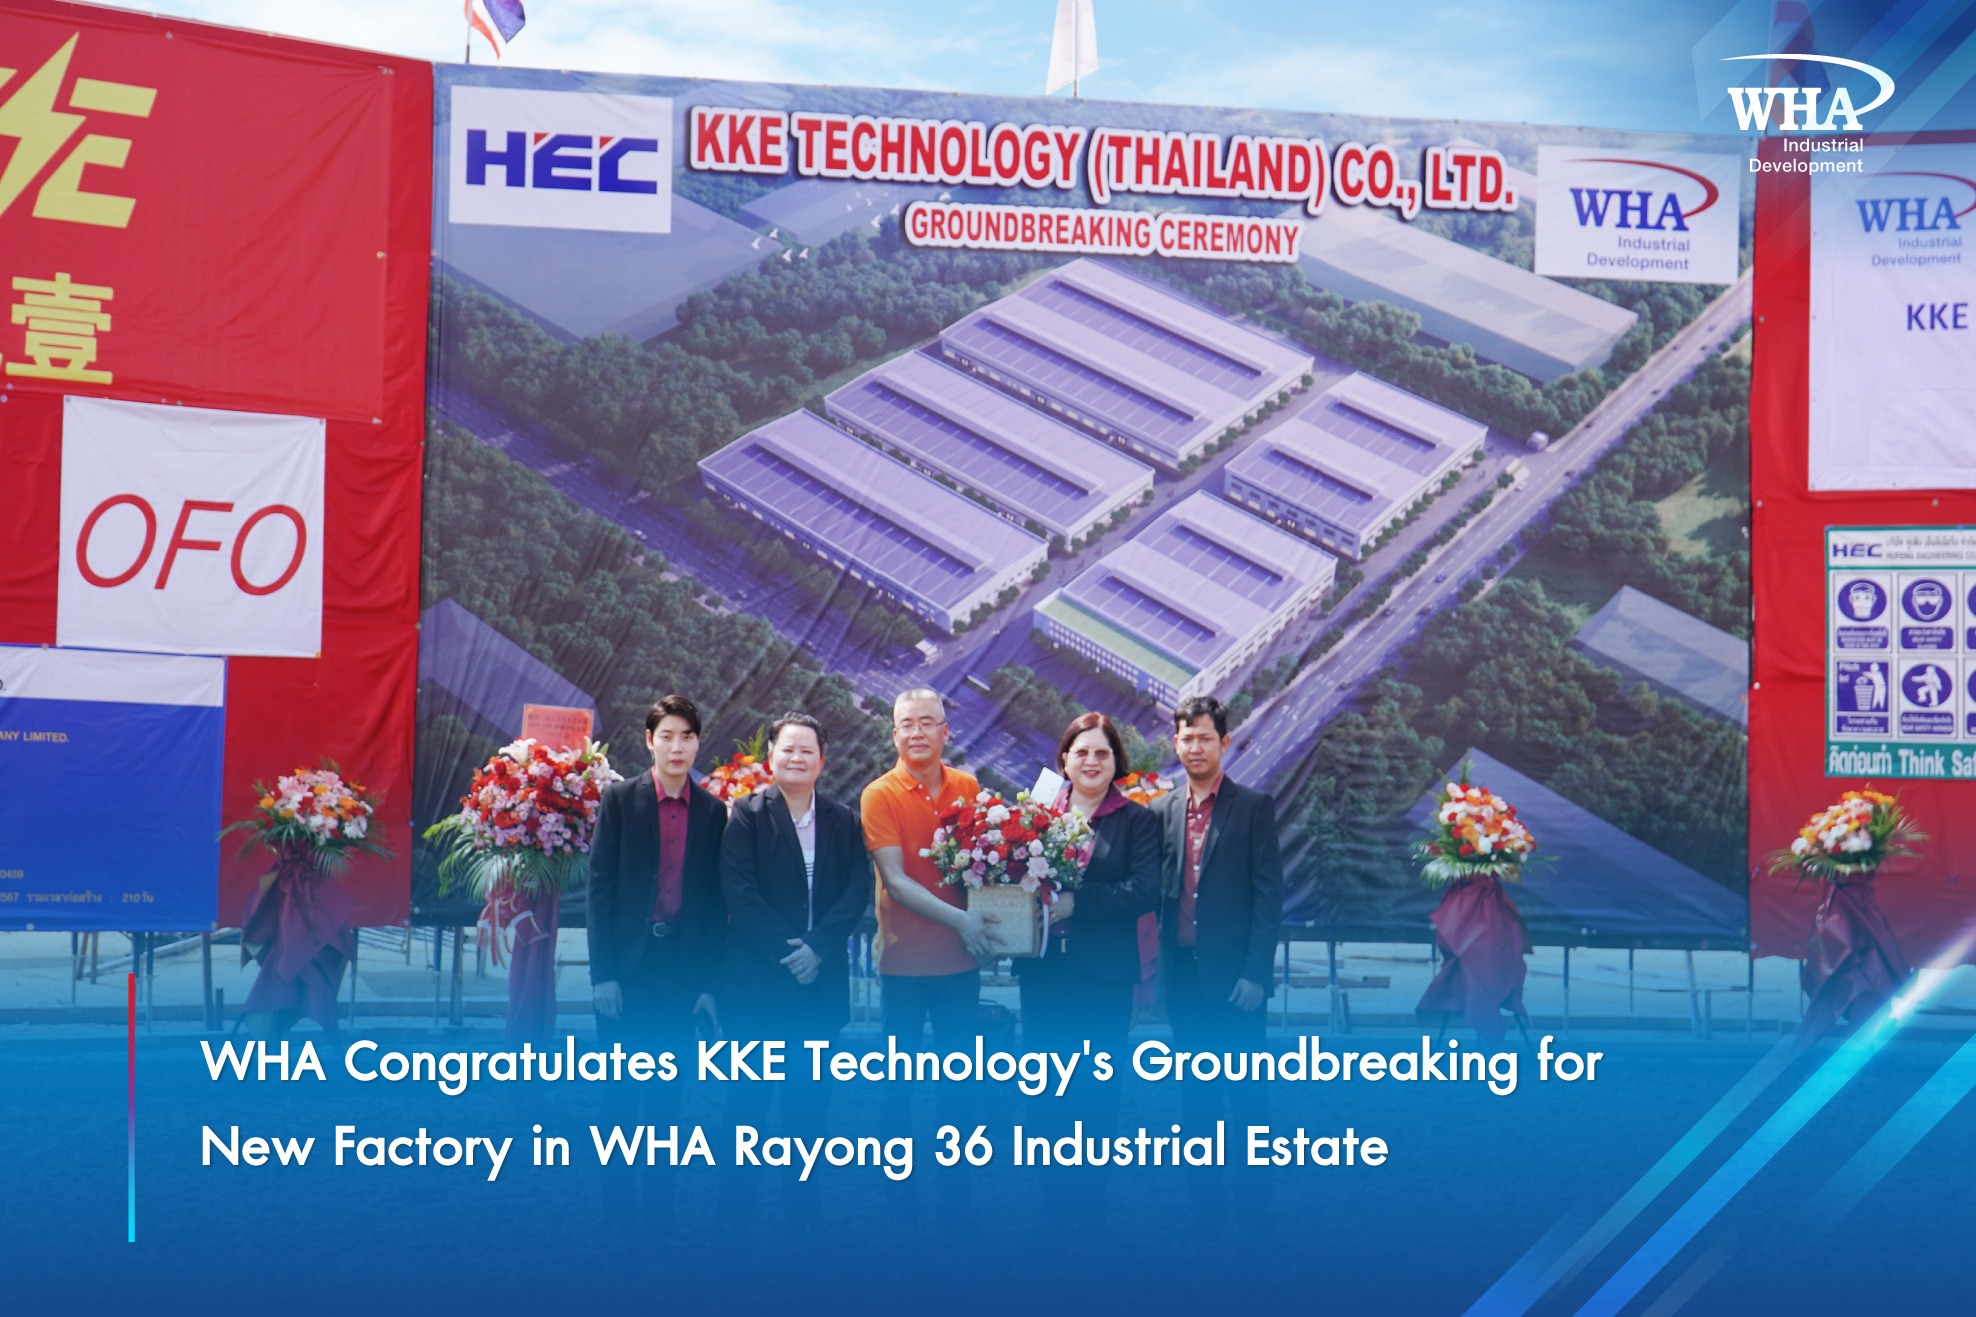 WHA Congratulates KKE Technology's Groundbreaking for New Factory in WHA Rayong 36 Industrial Estate